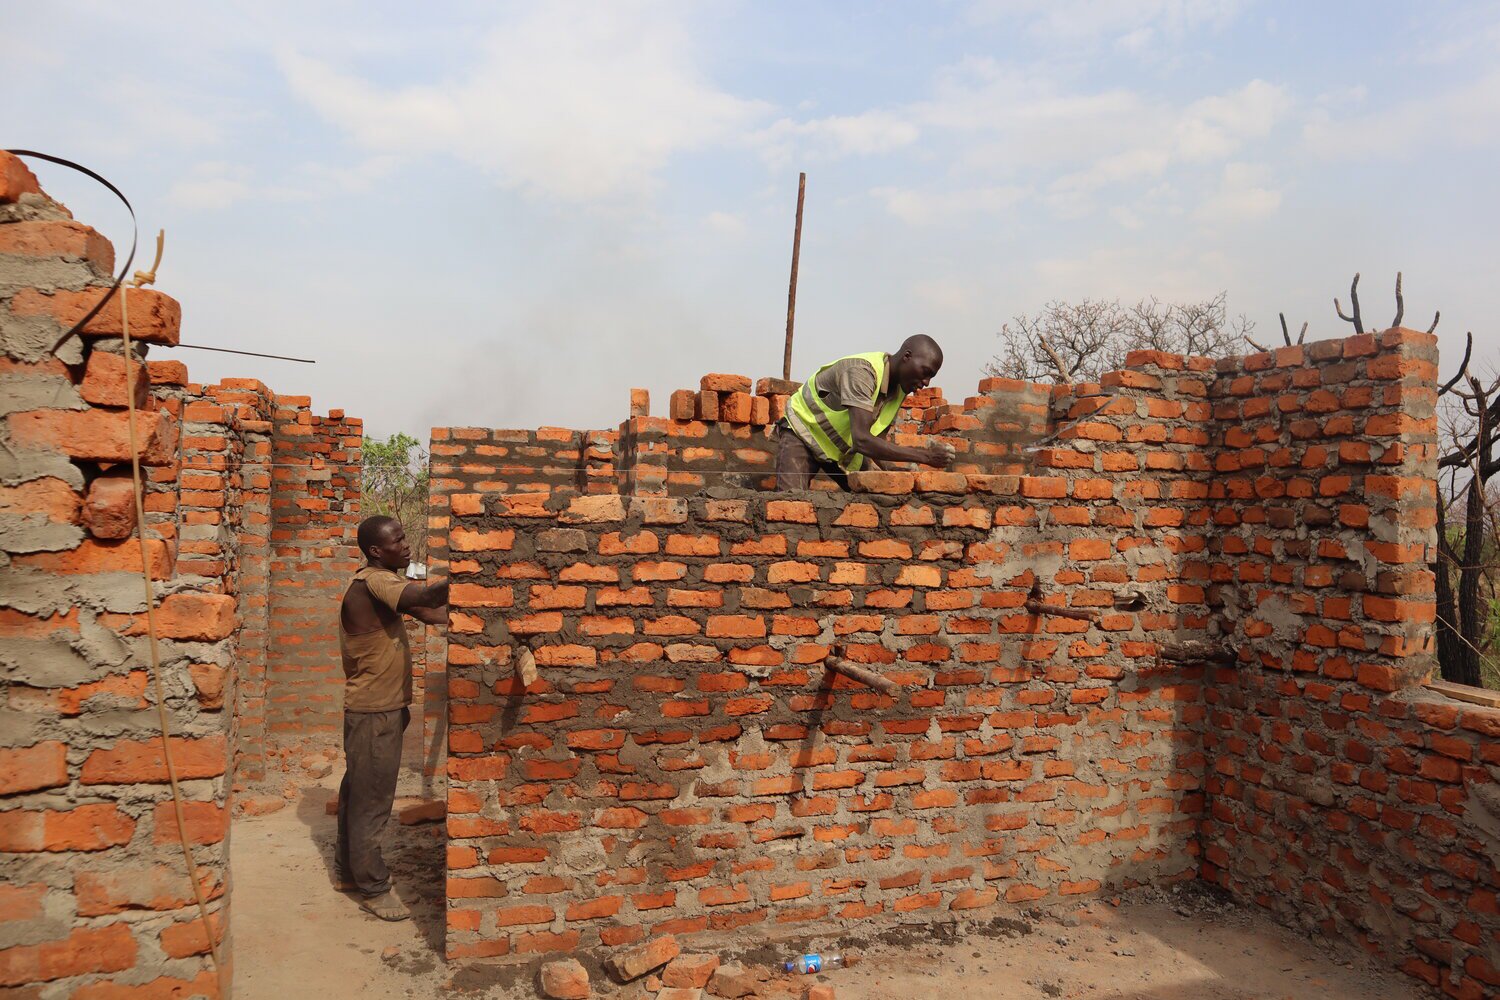 Construction workers building out the main wall of one of the rooms